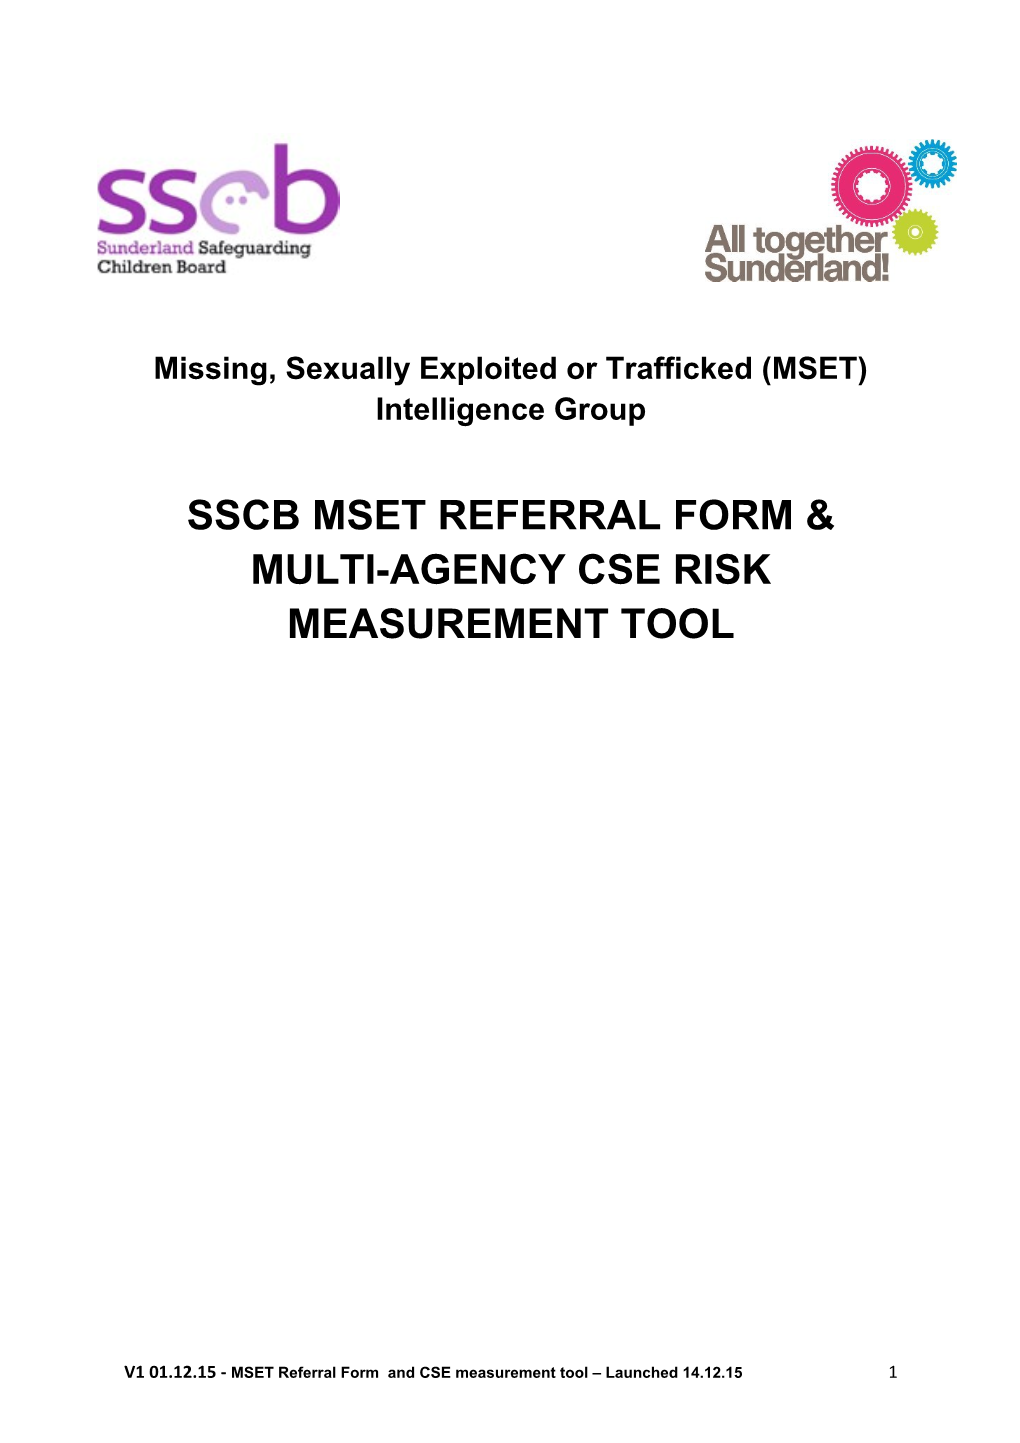 Missing, Sexually Exploited Or Trafficked (MSET) Intelligence Group